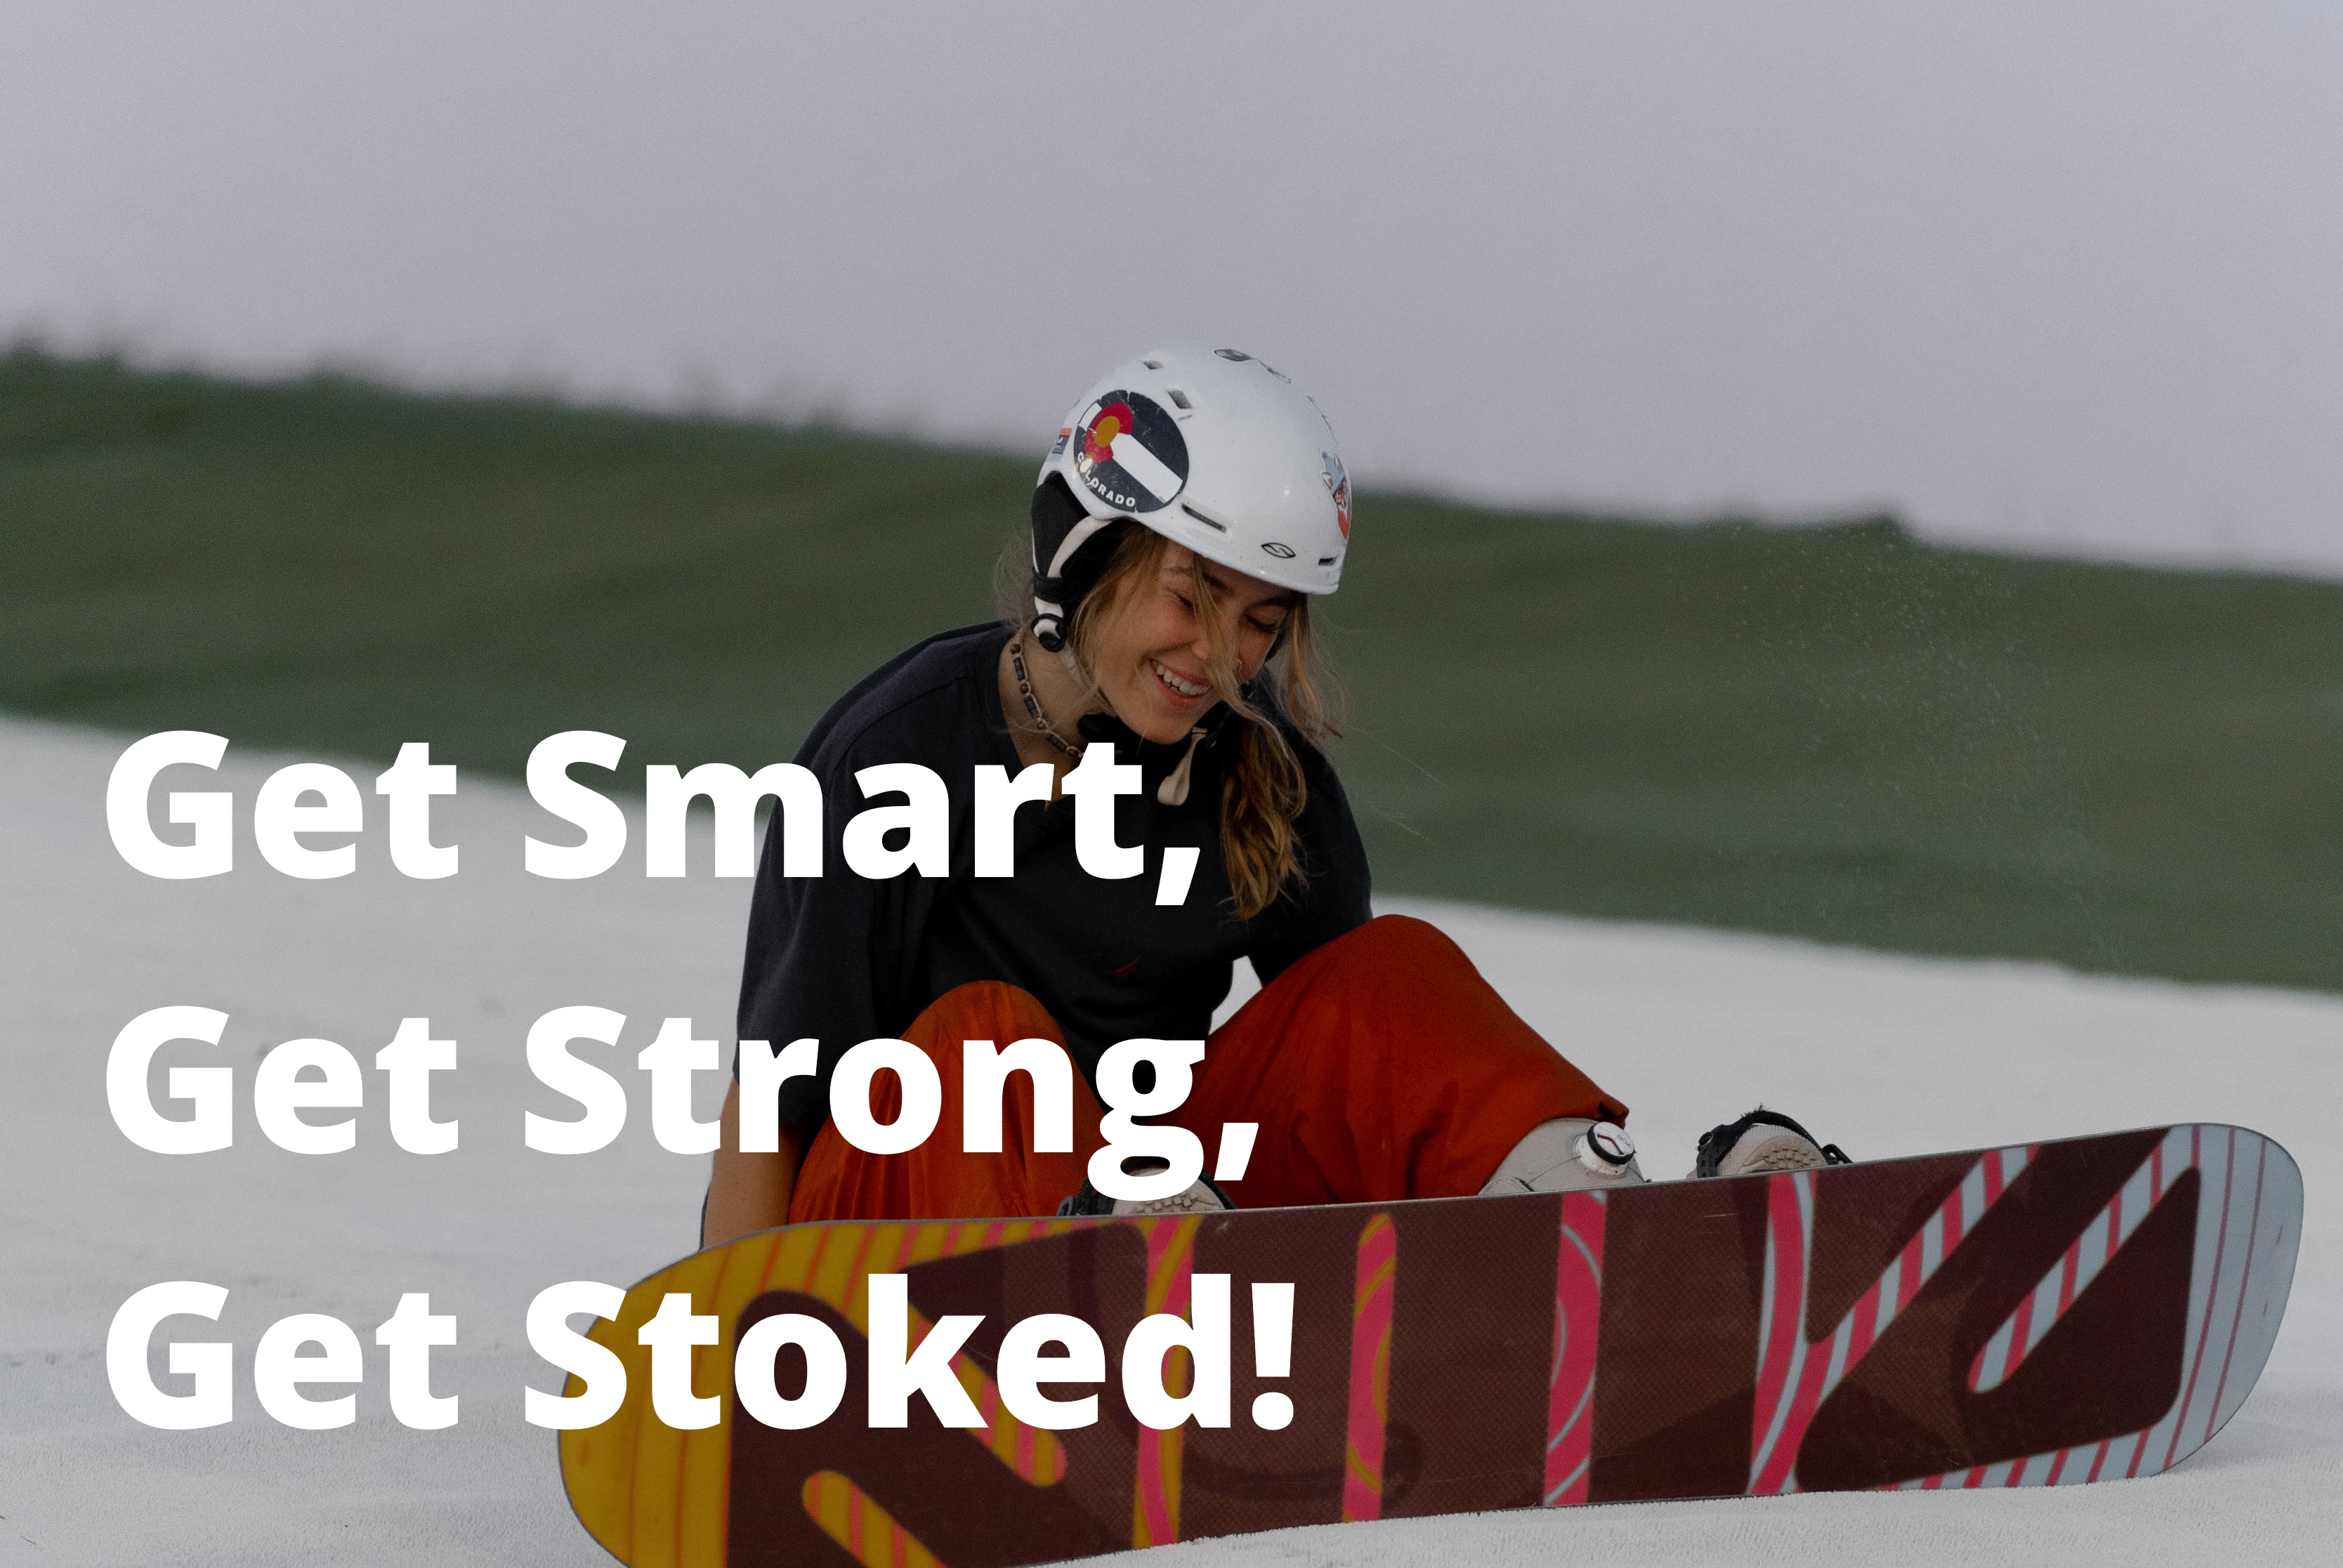 Get Smart, Get Strong, Get Stoked!